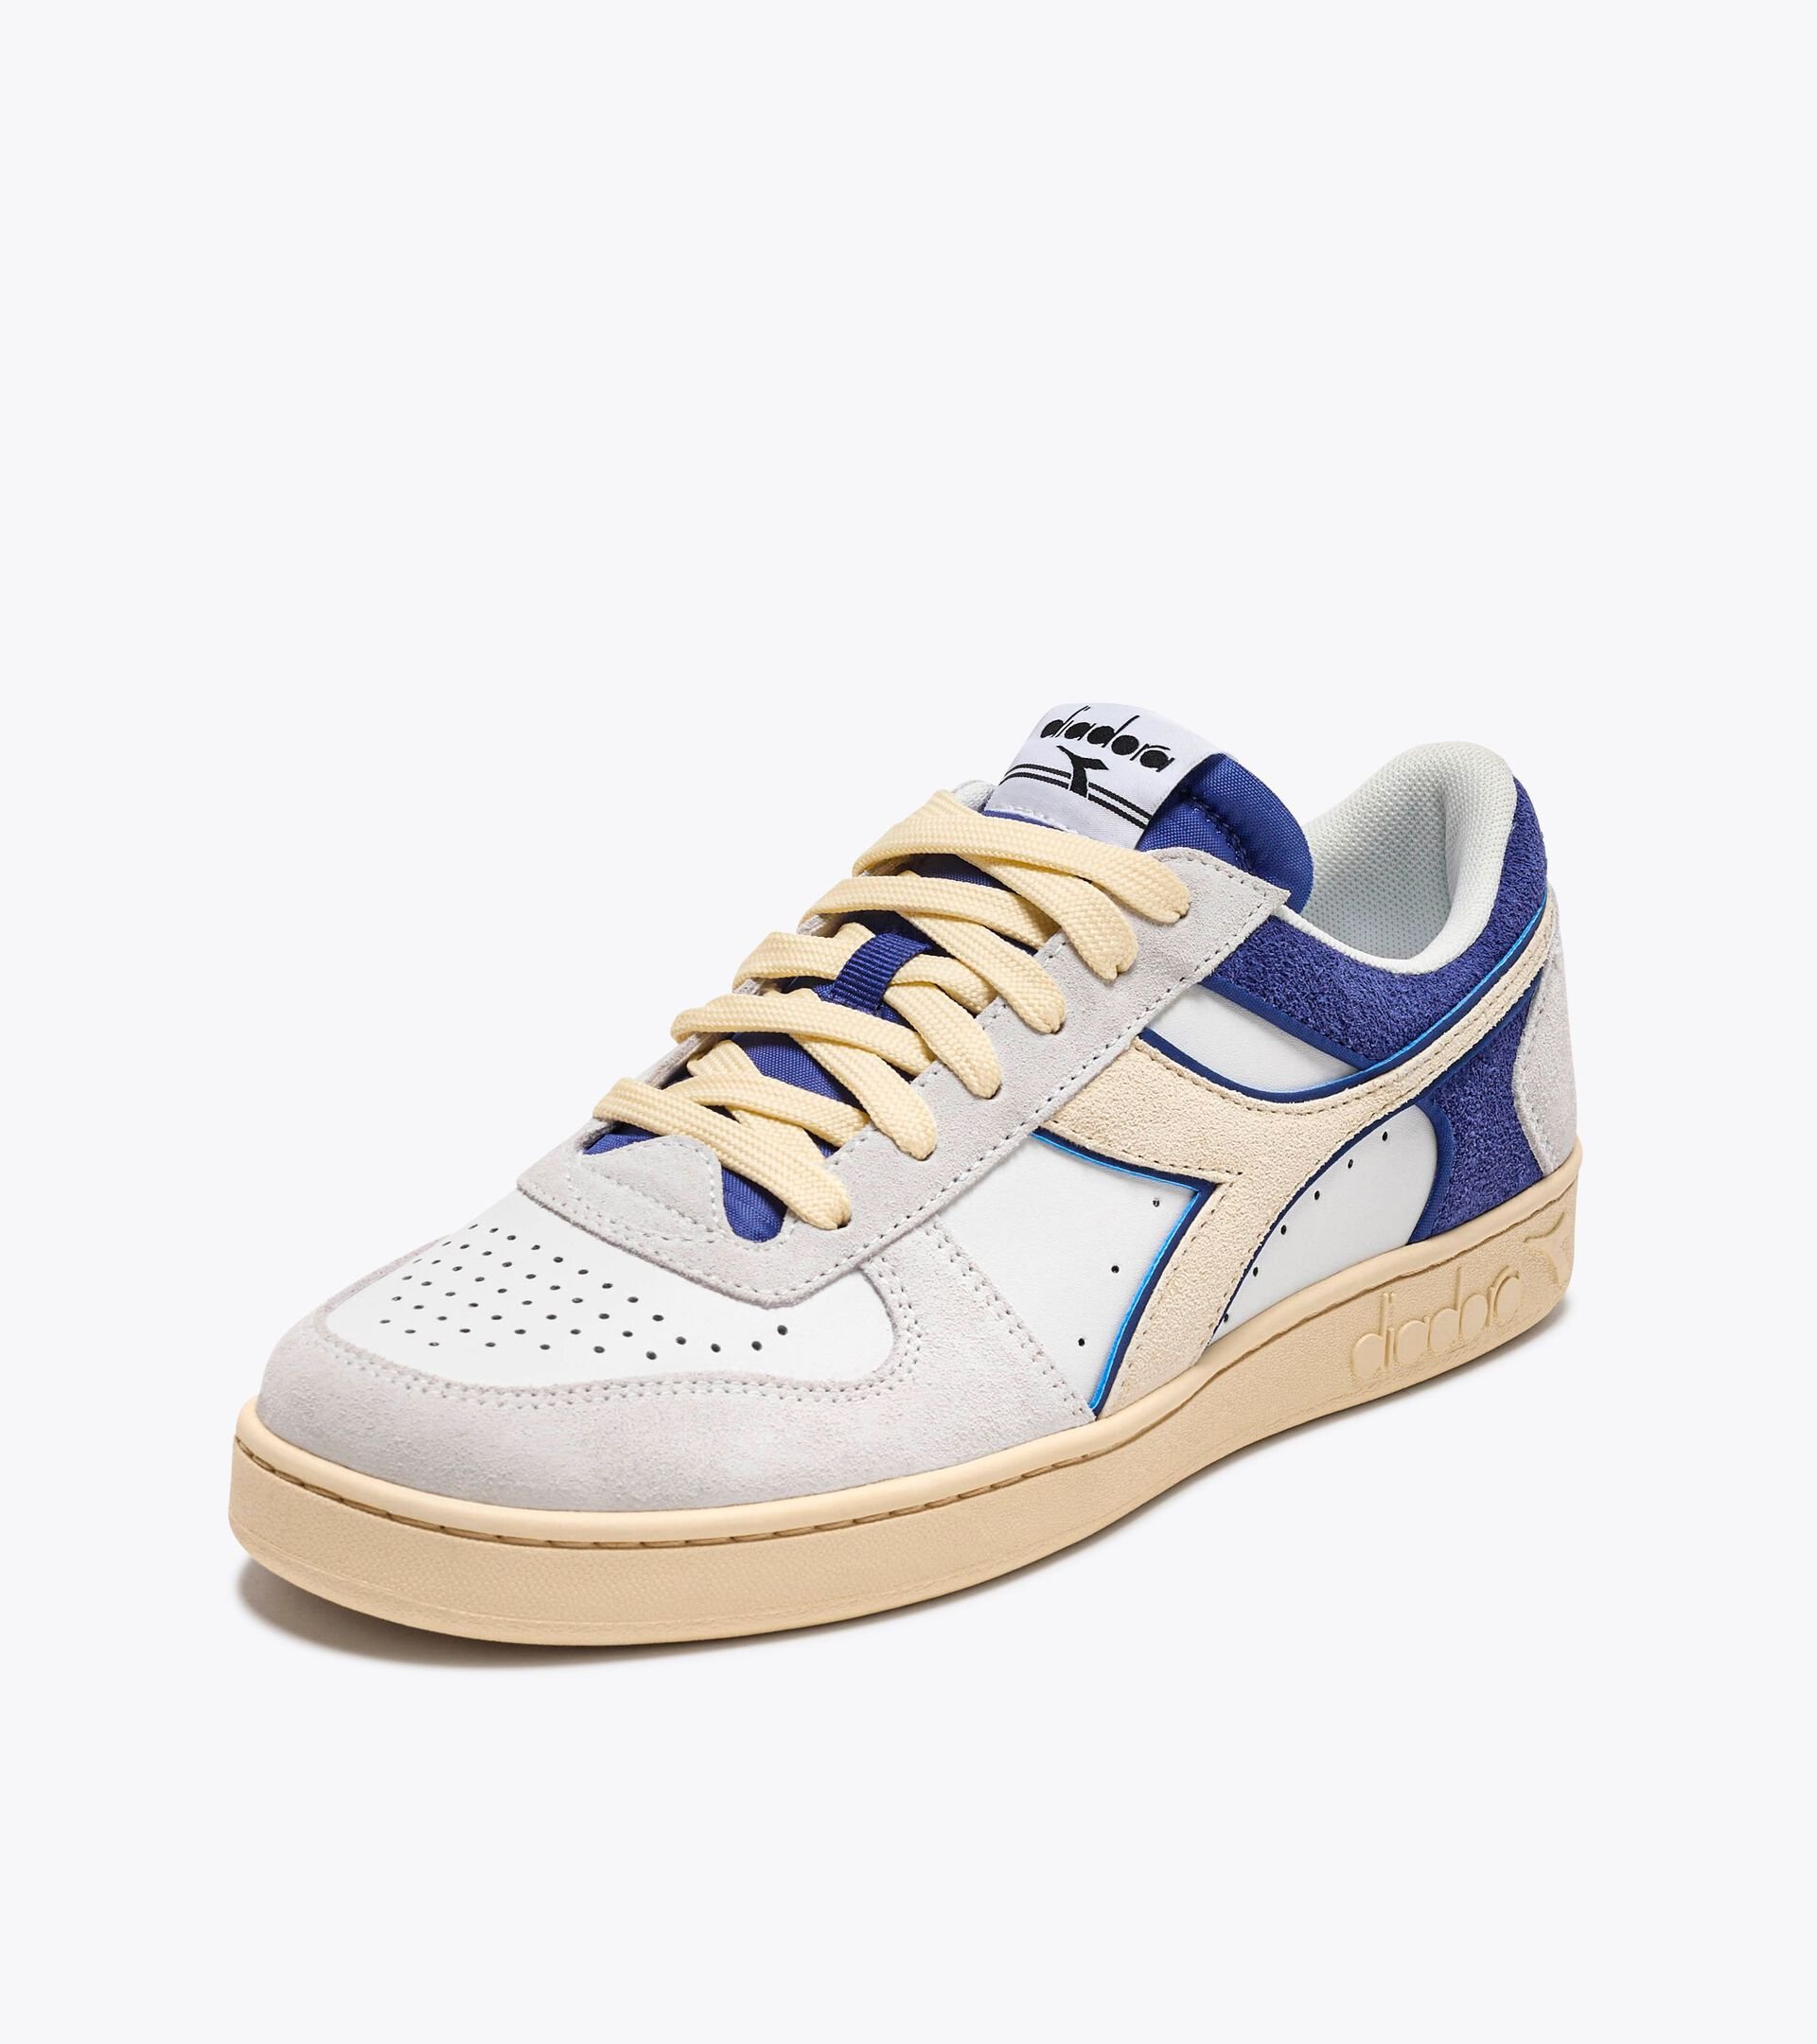 Sporty sneakers - Gender neutral MAGIC BASKET LOW SUEDE LEATHER WHITE/BLUE EYES - Diadora